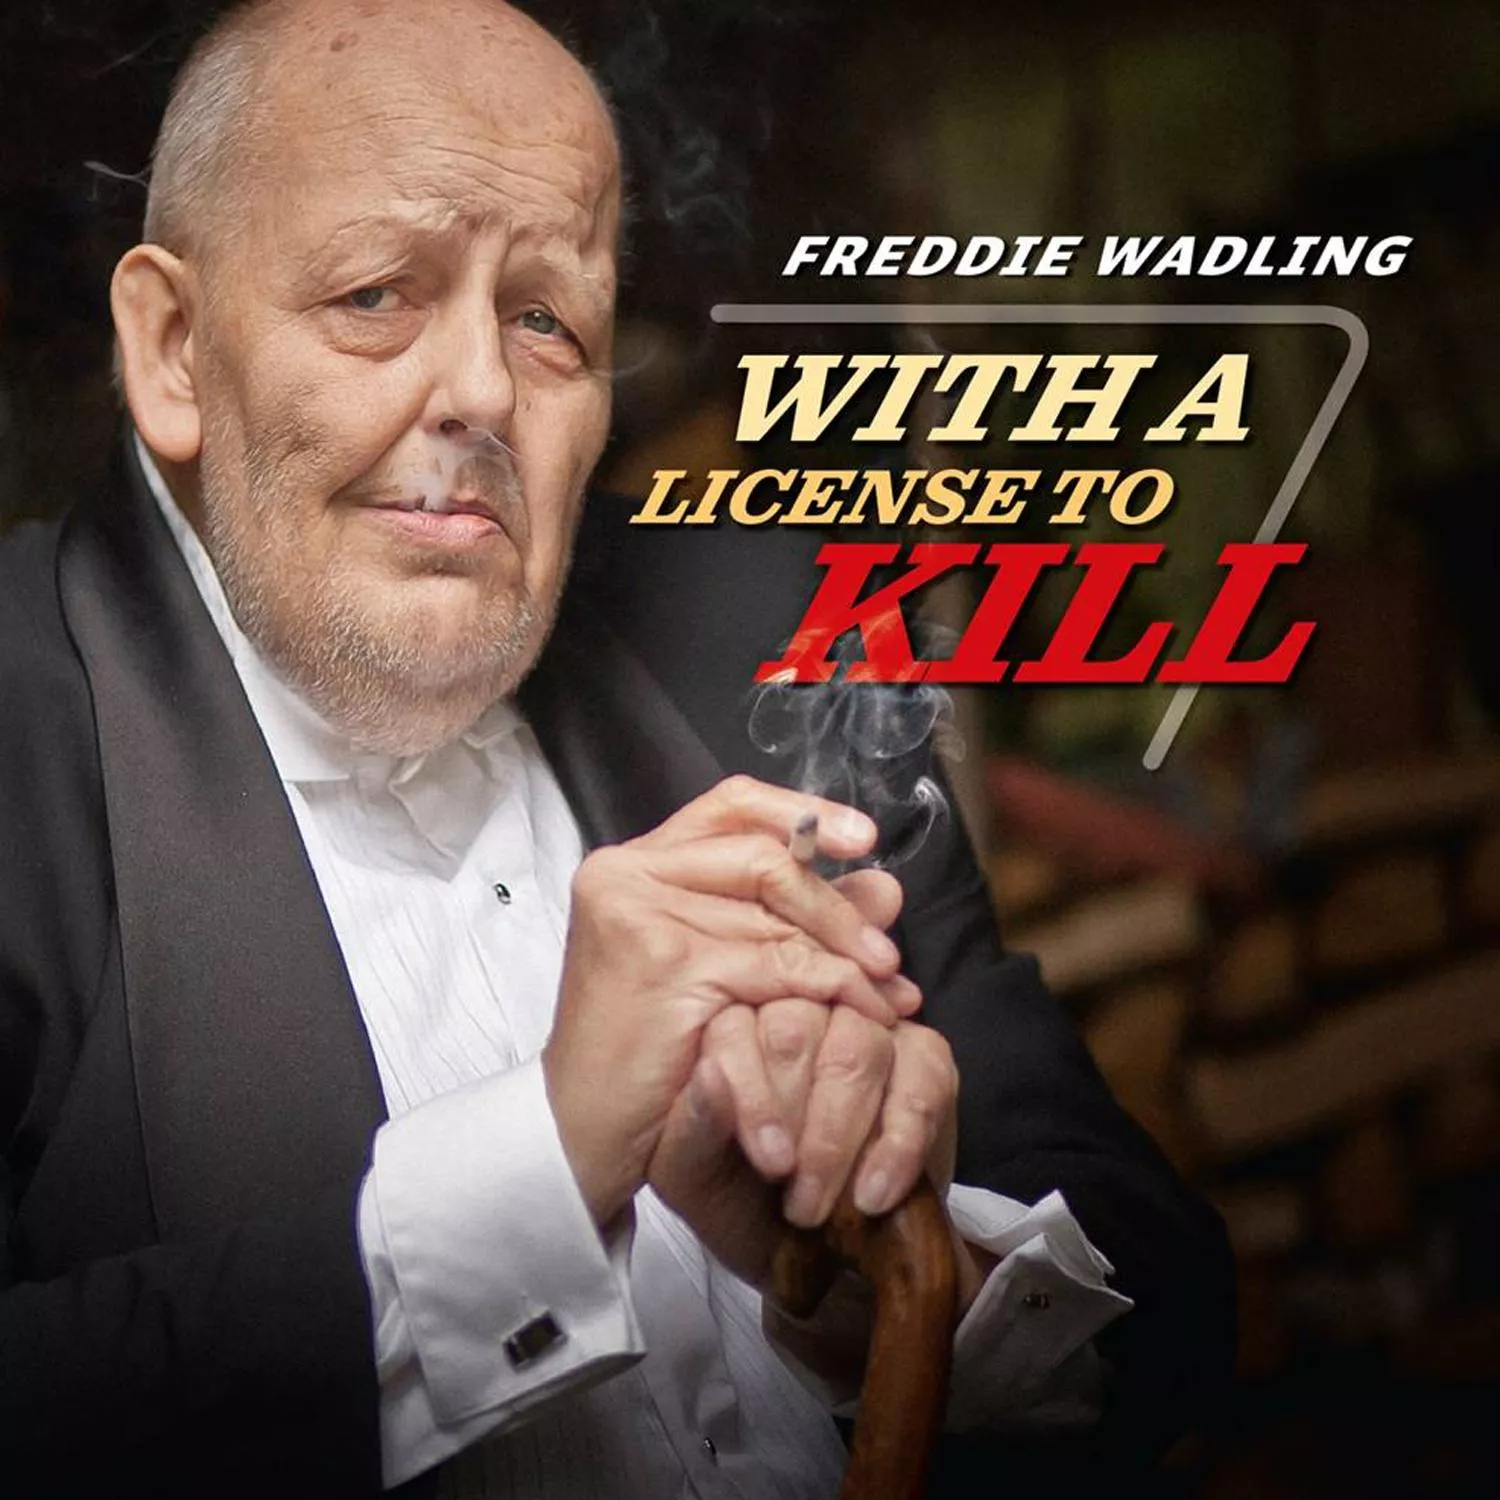 With A License To Kill - Freddie Wadling